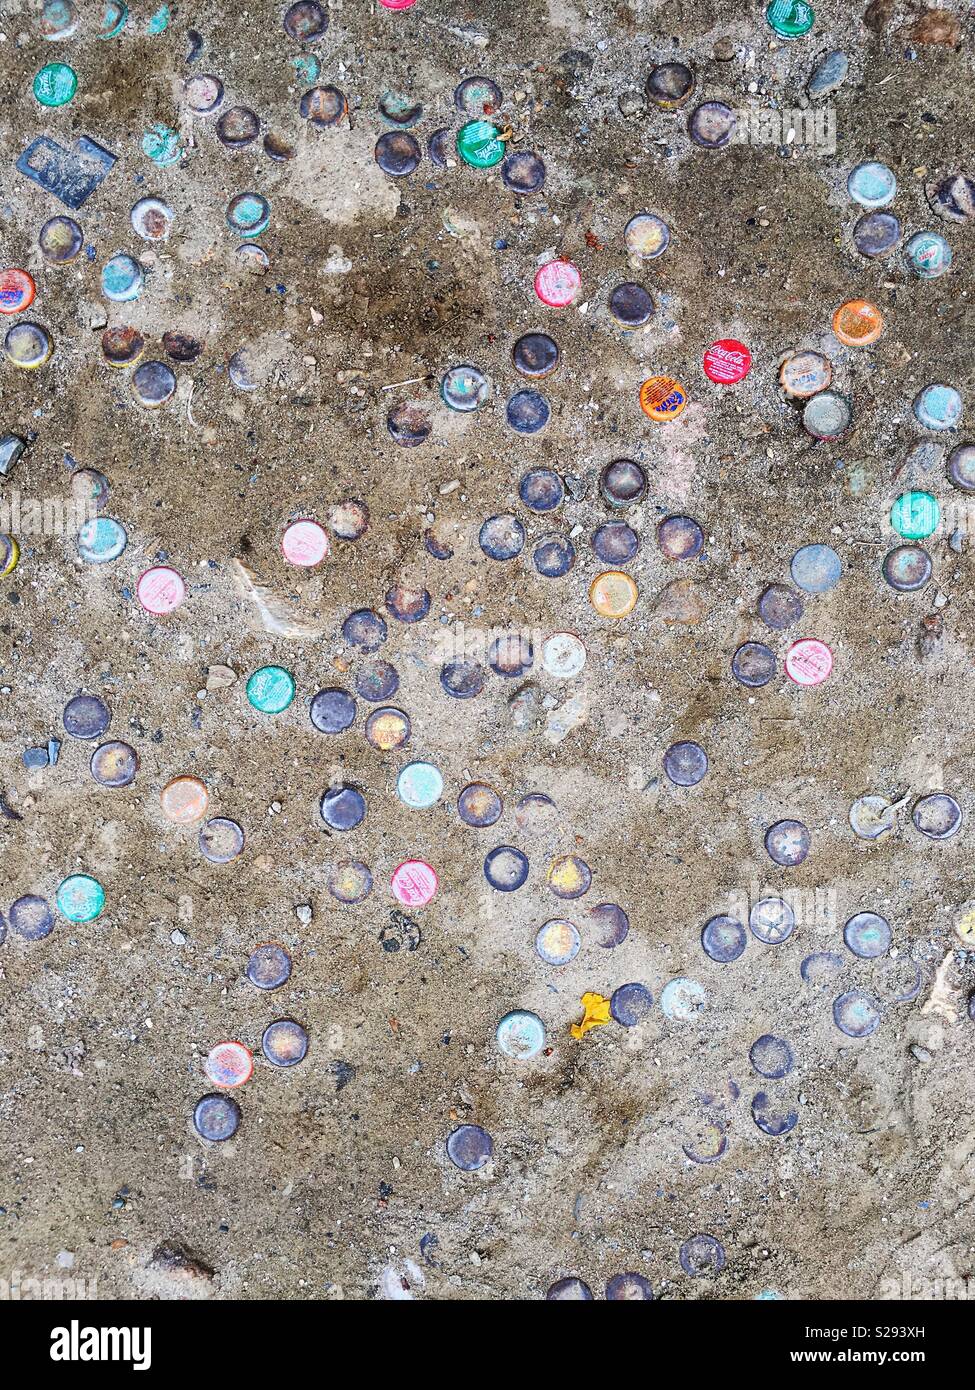 Bottle caps embedded in the ground Stock Photo